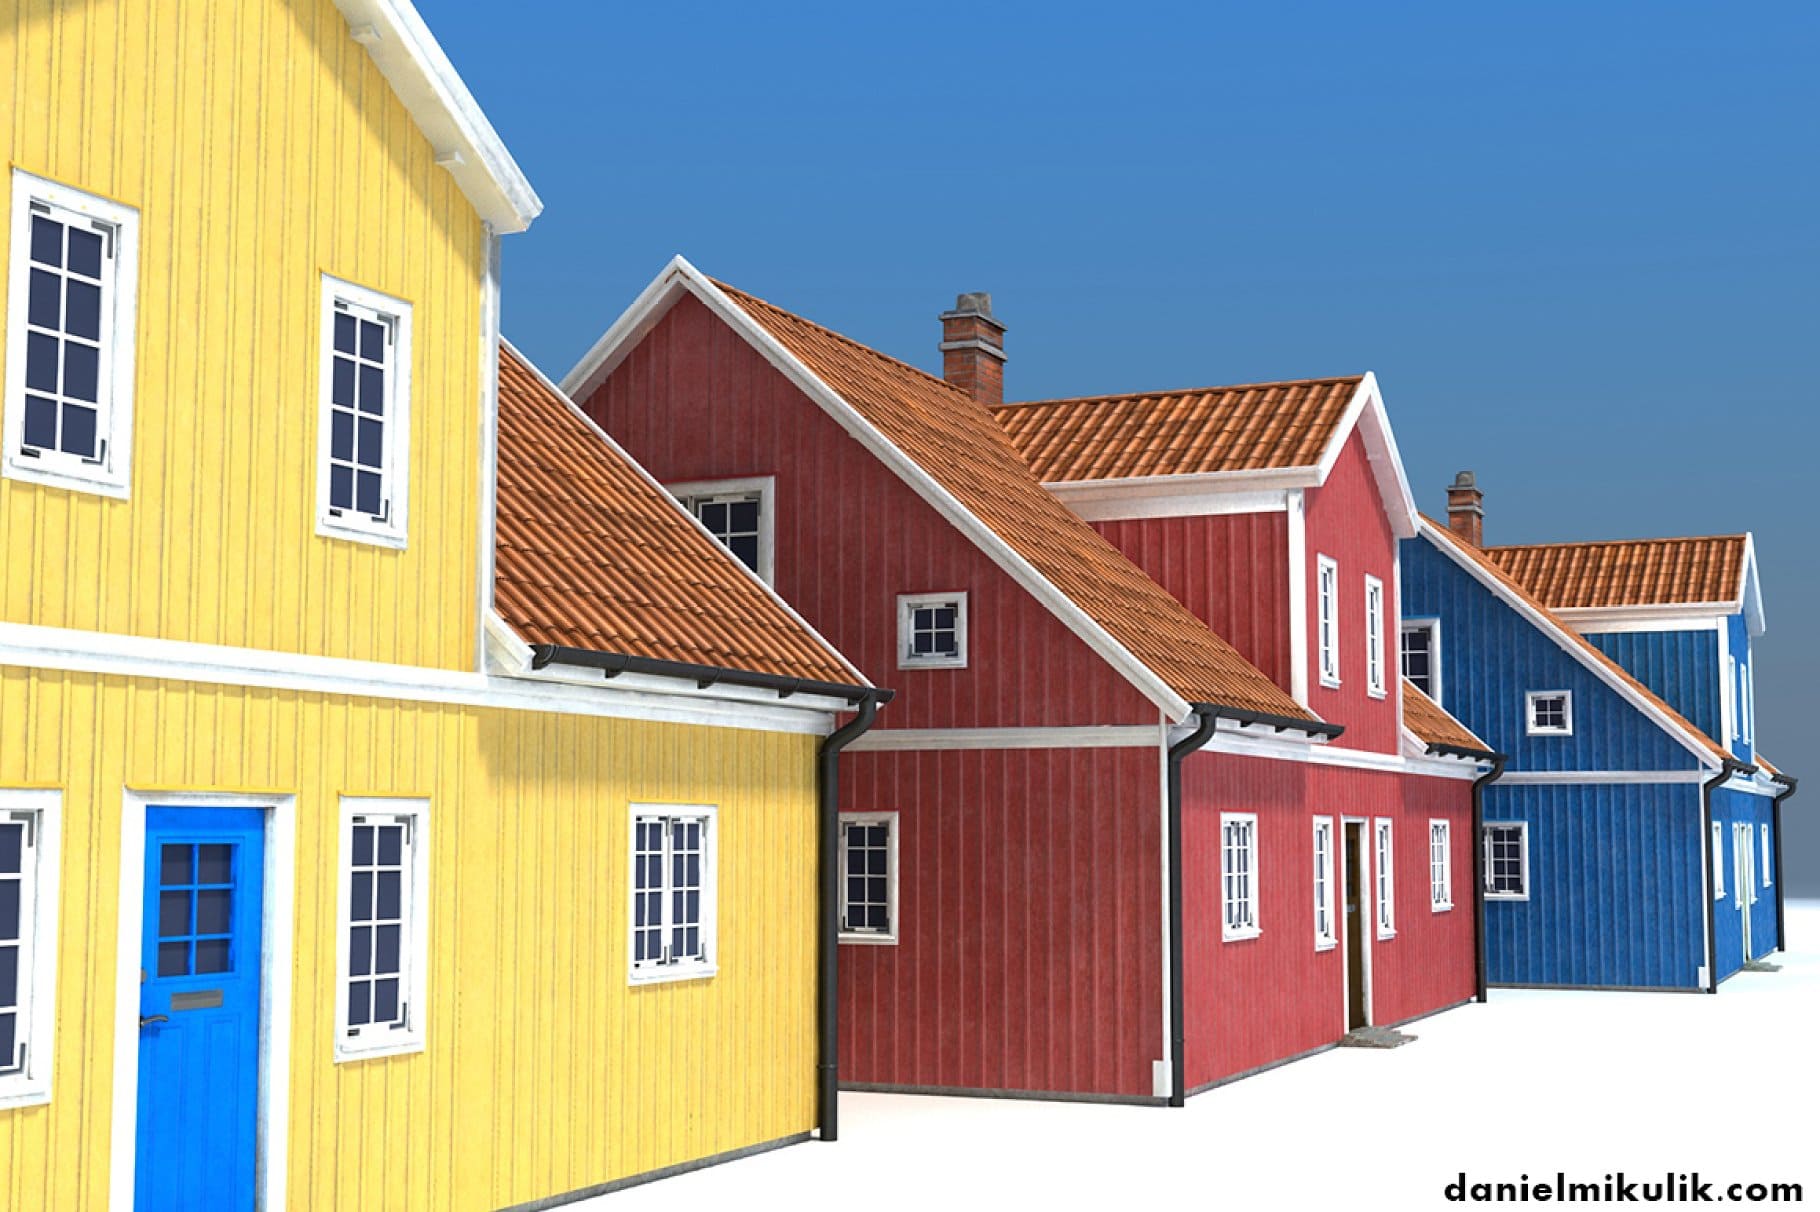 Yellow, red and blue house with brown roofs.